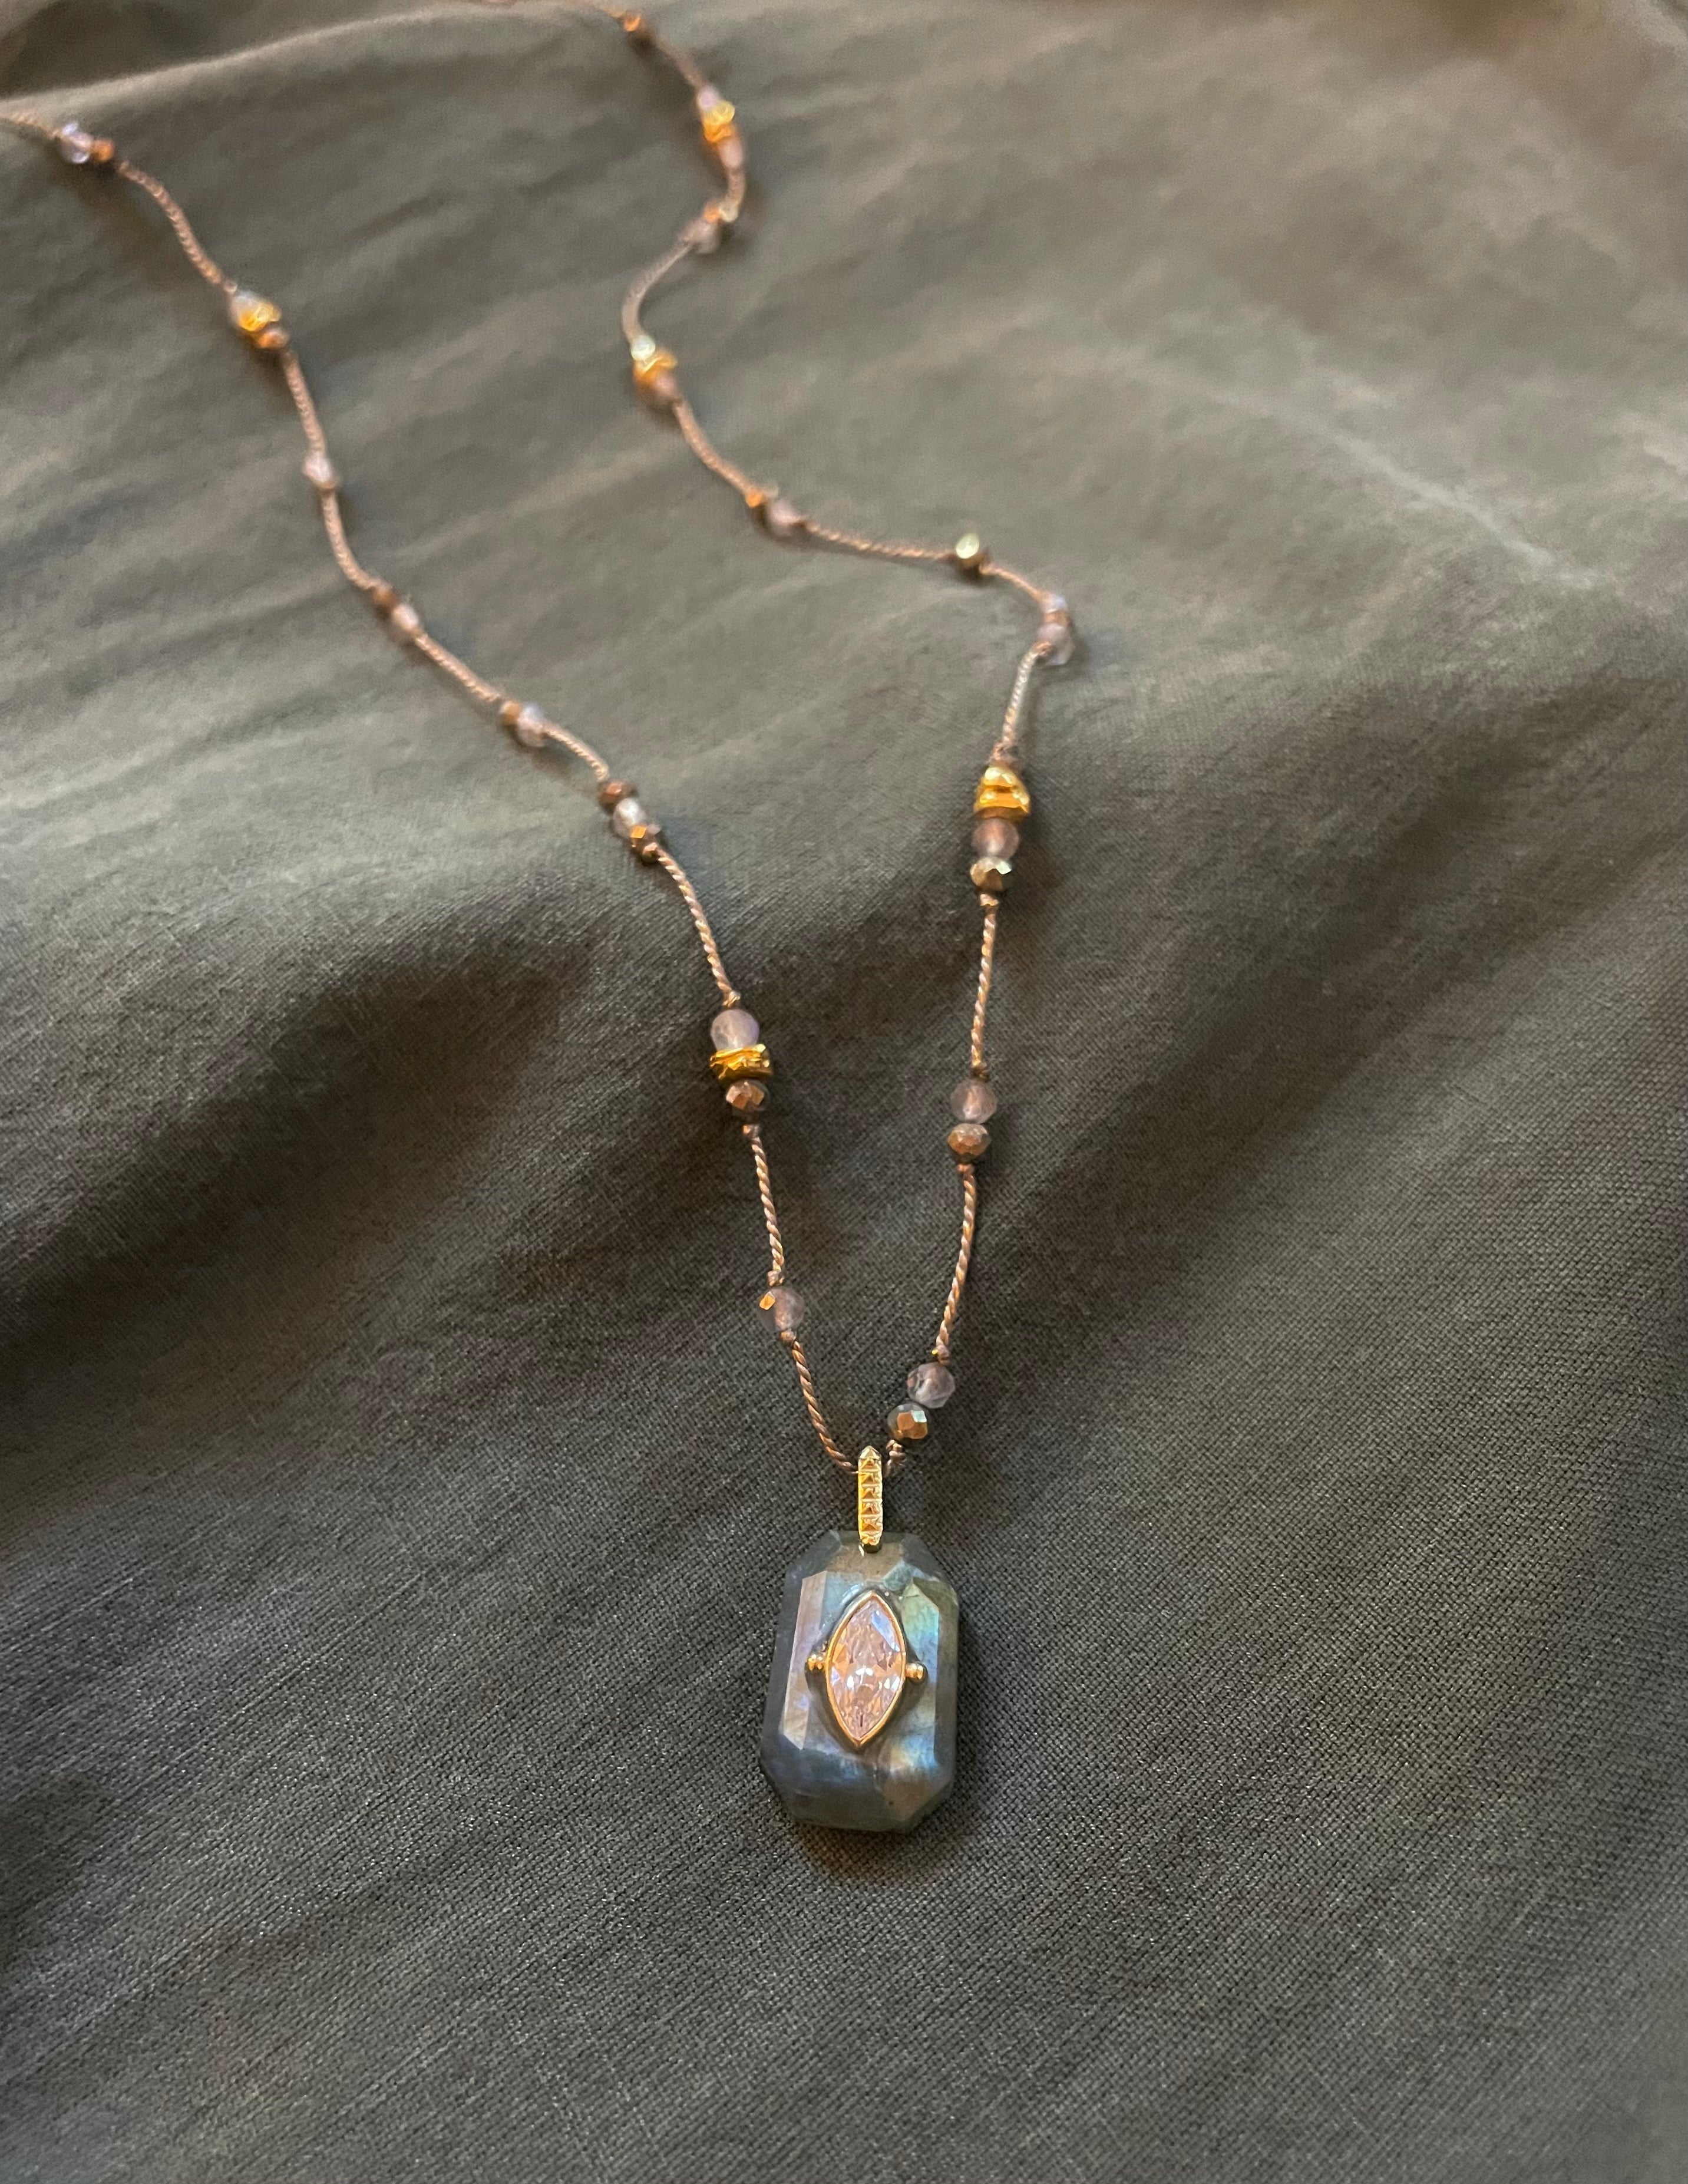 layering necklace with labradorite pyrite stones on adjustable cord by hanka in